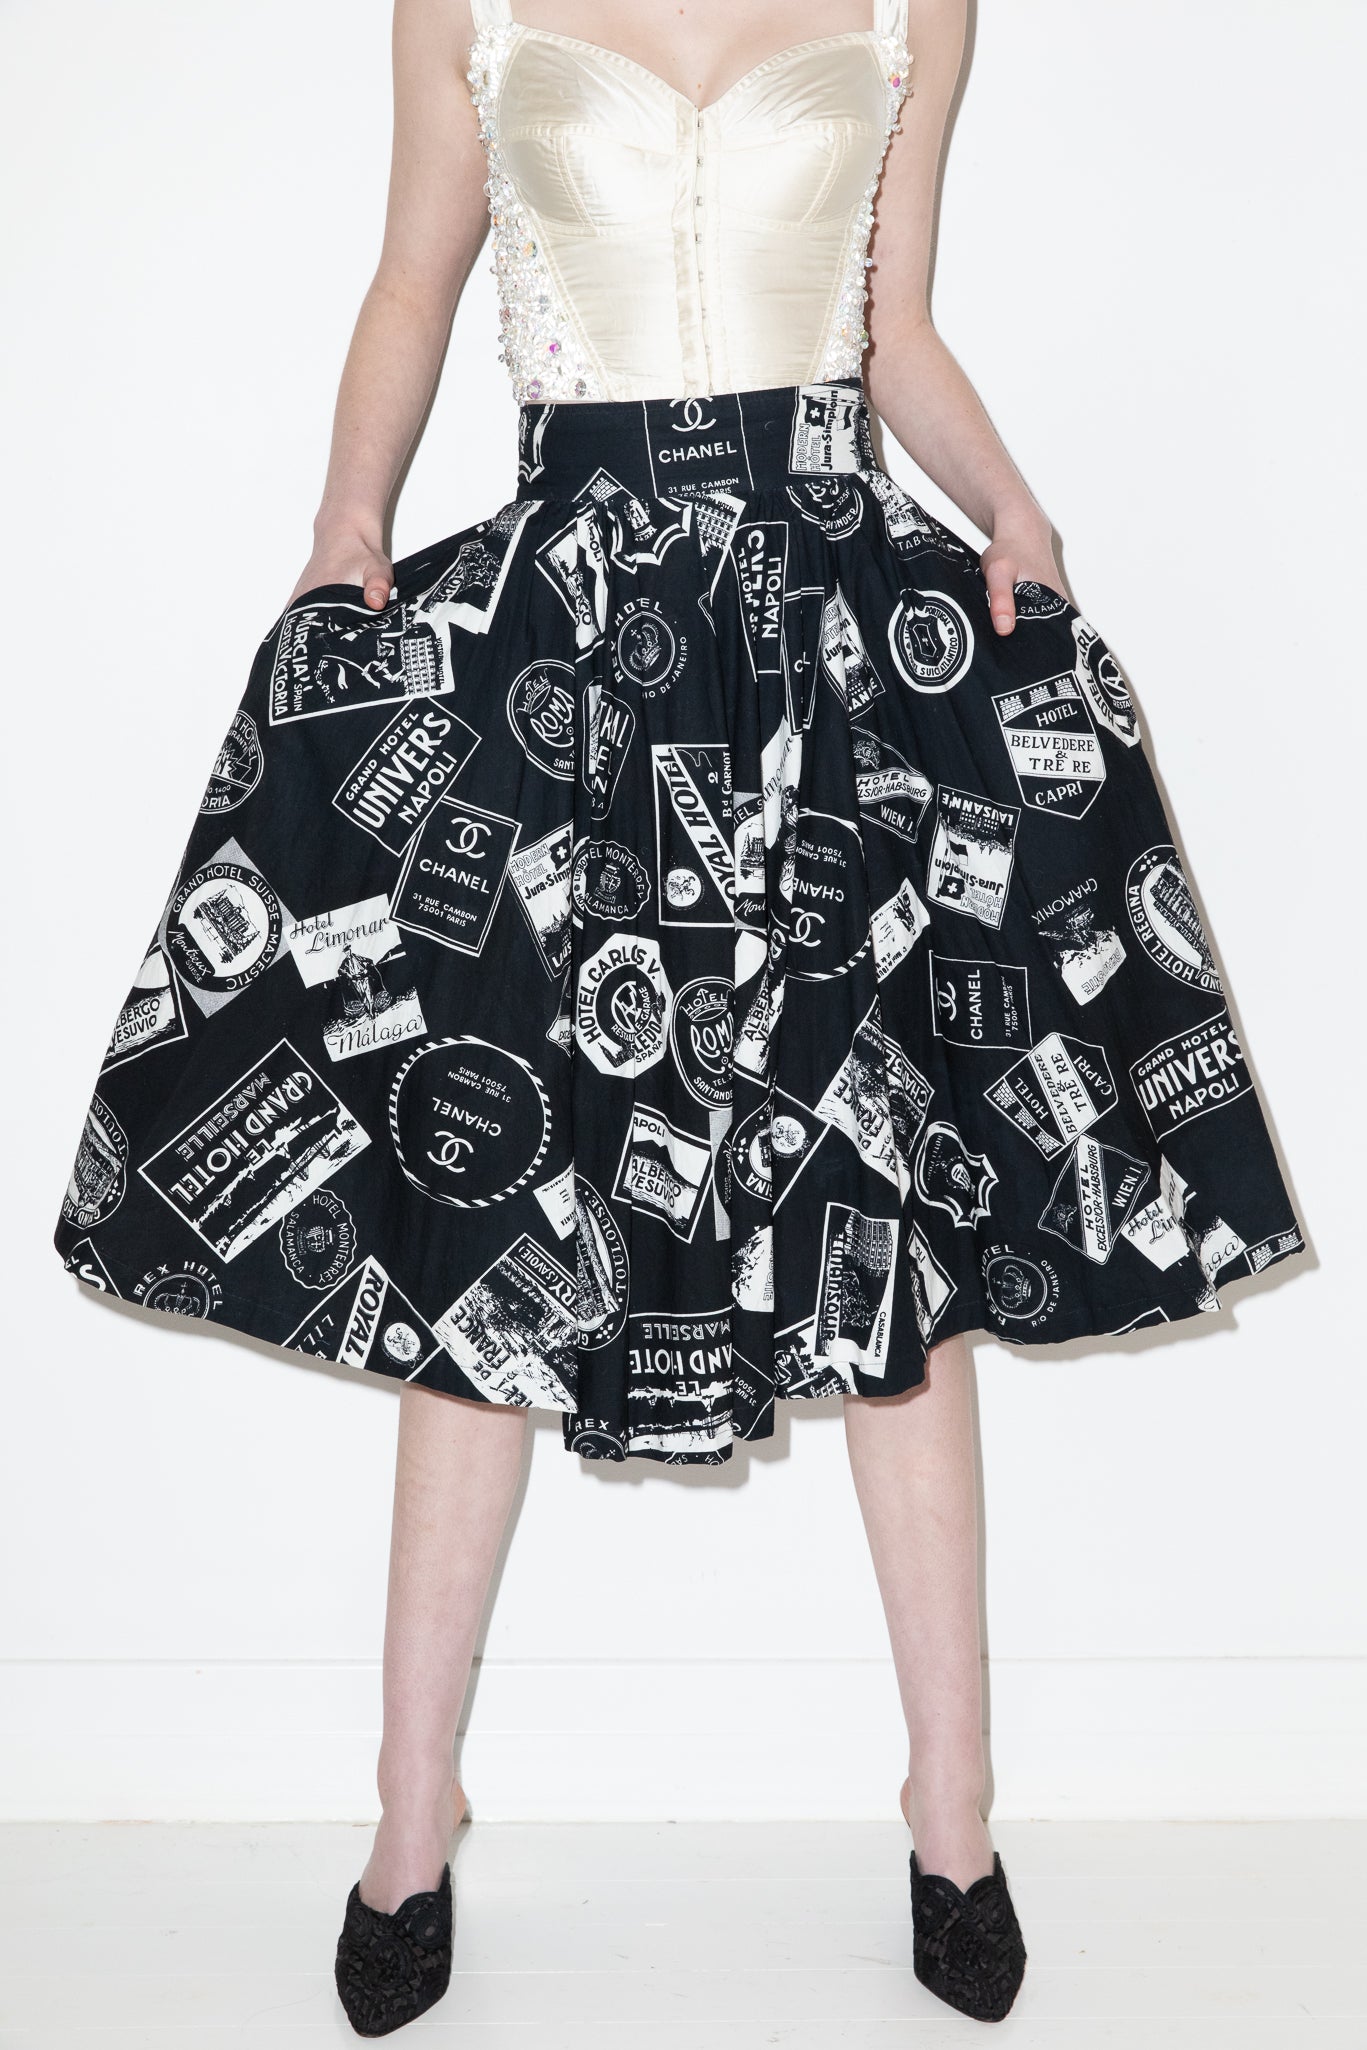 Chanel <br> S/S 1989 campaign runway Grand Hotel print full skirt